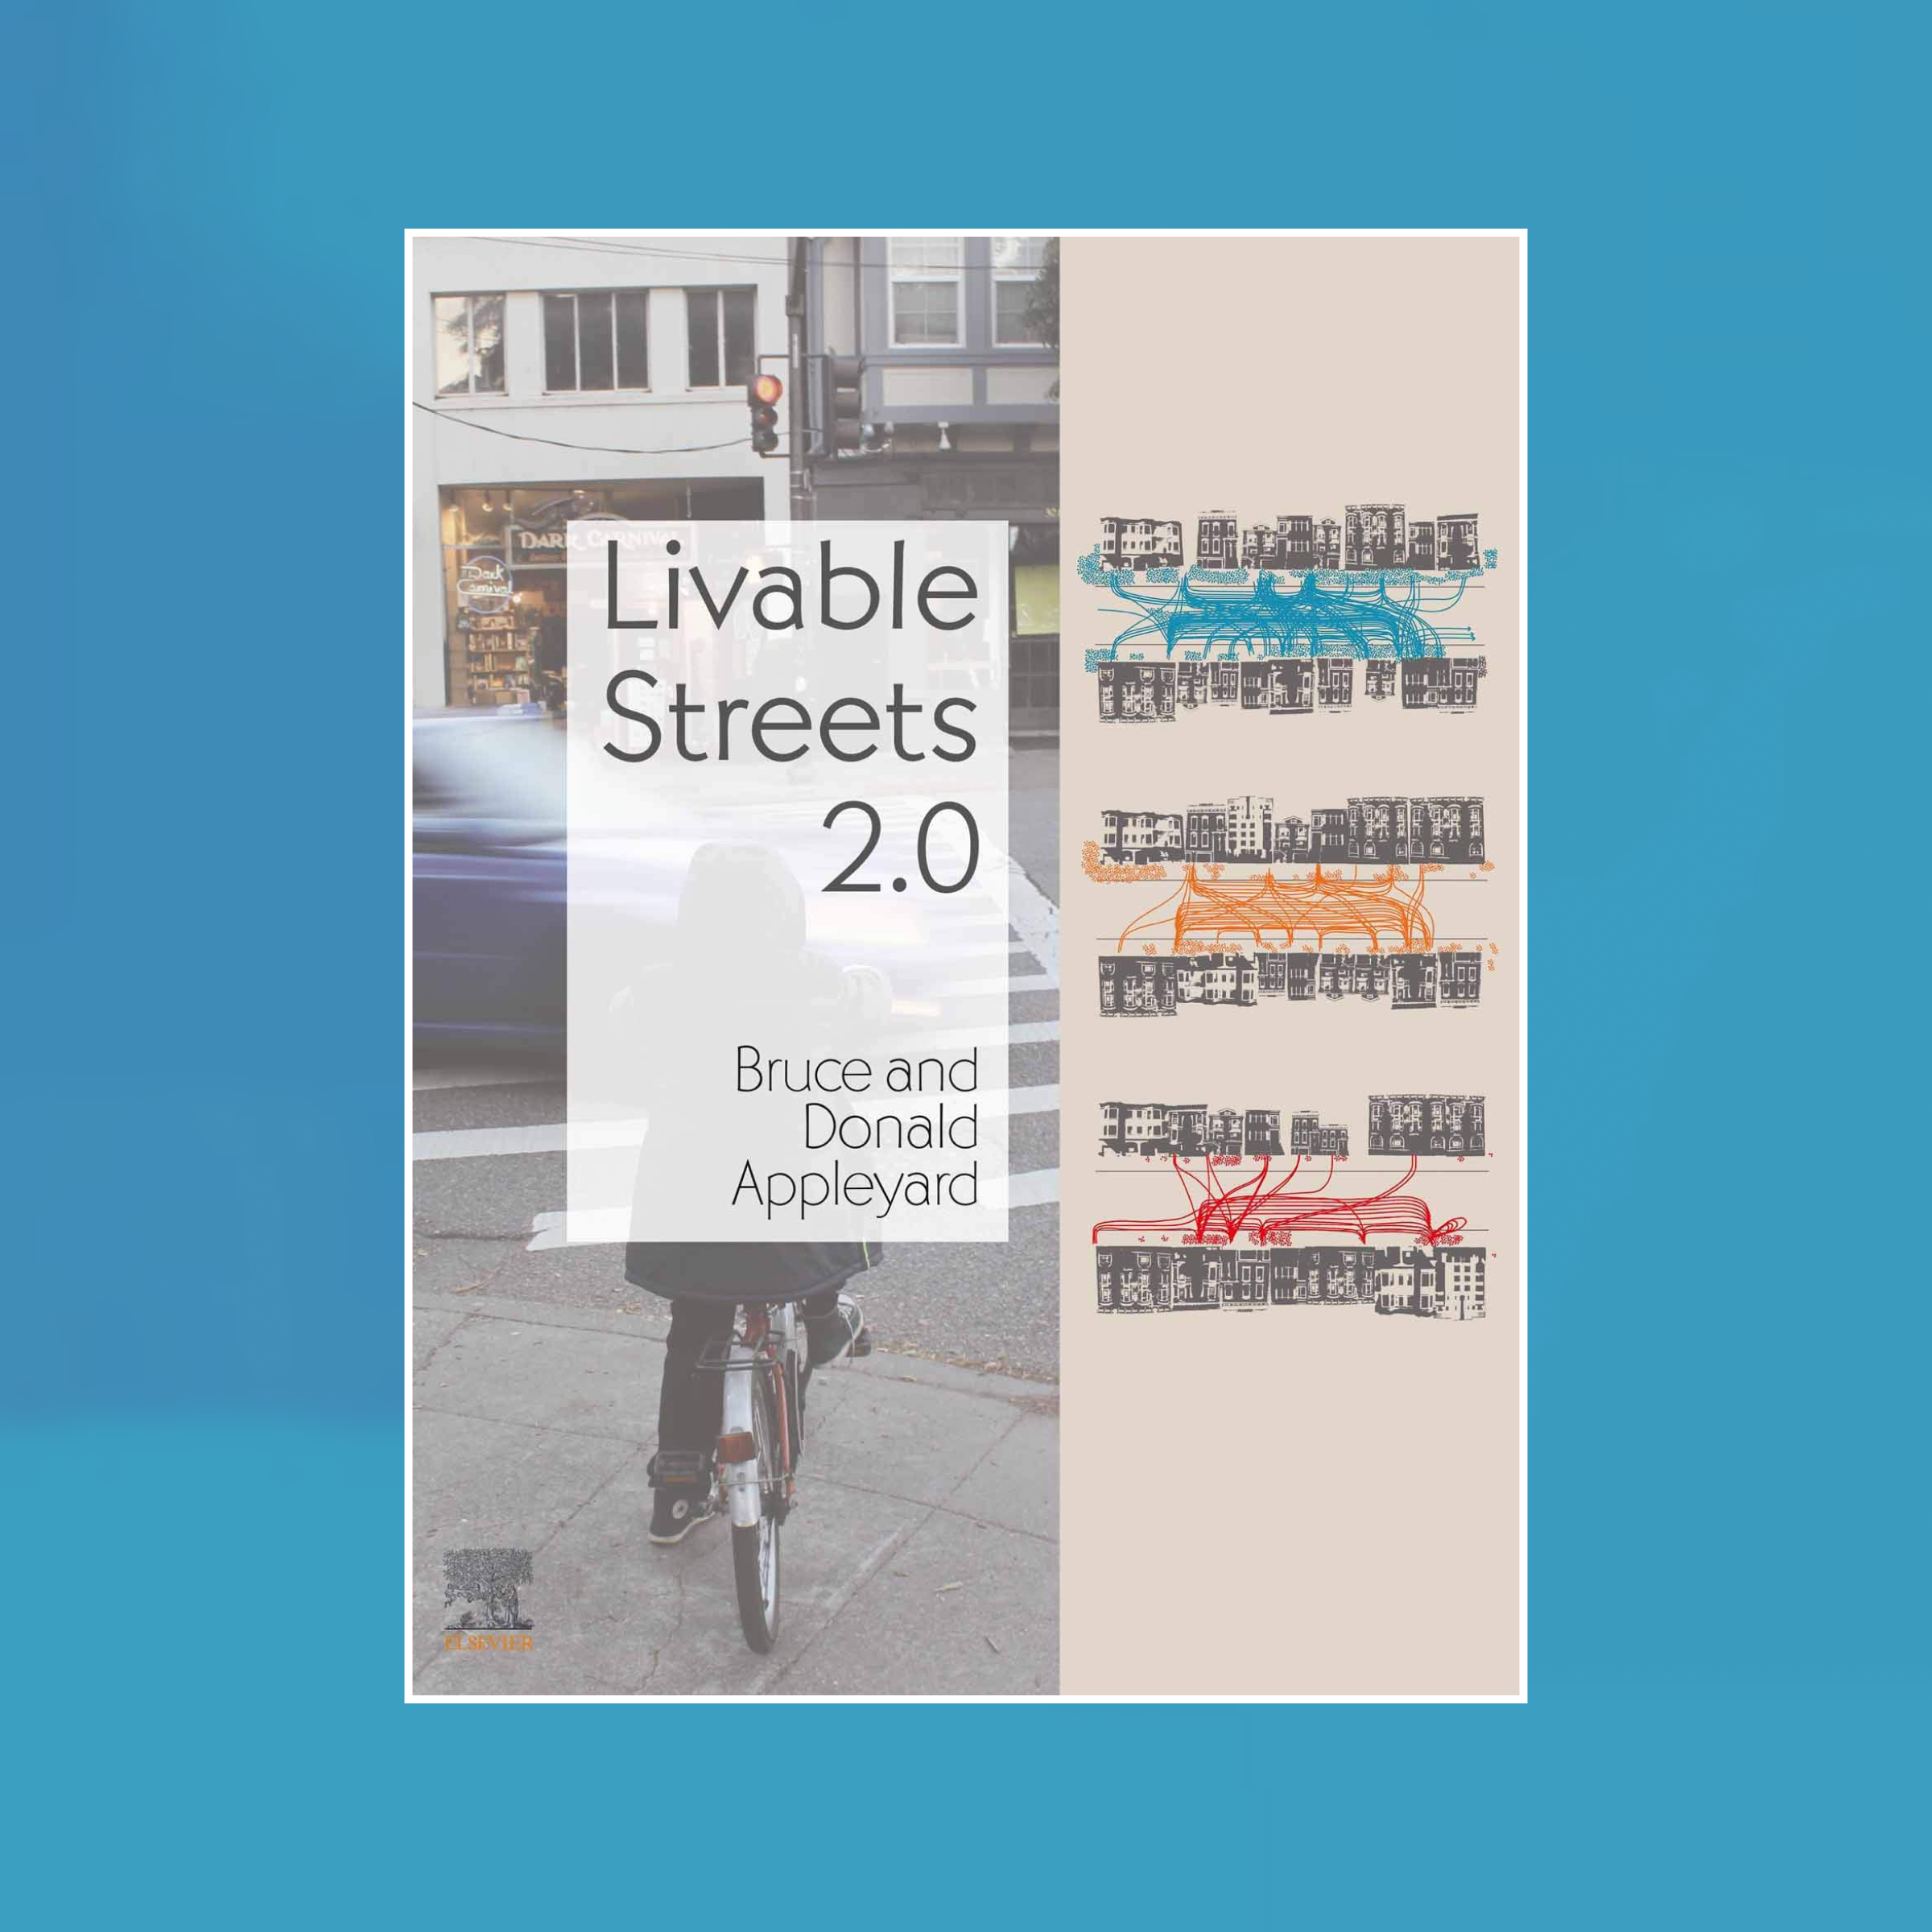 Book cover of Livable Streets 2.0 against an abstract painted background